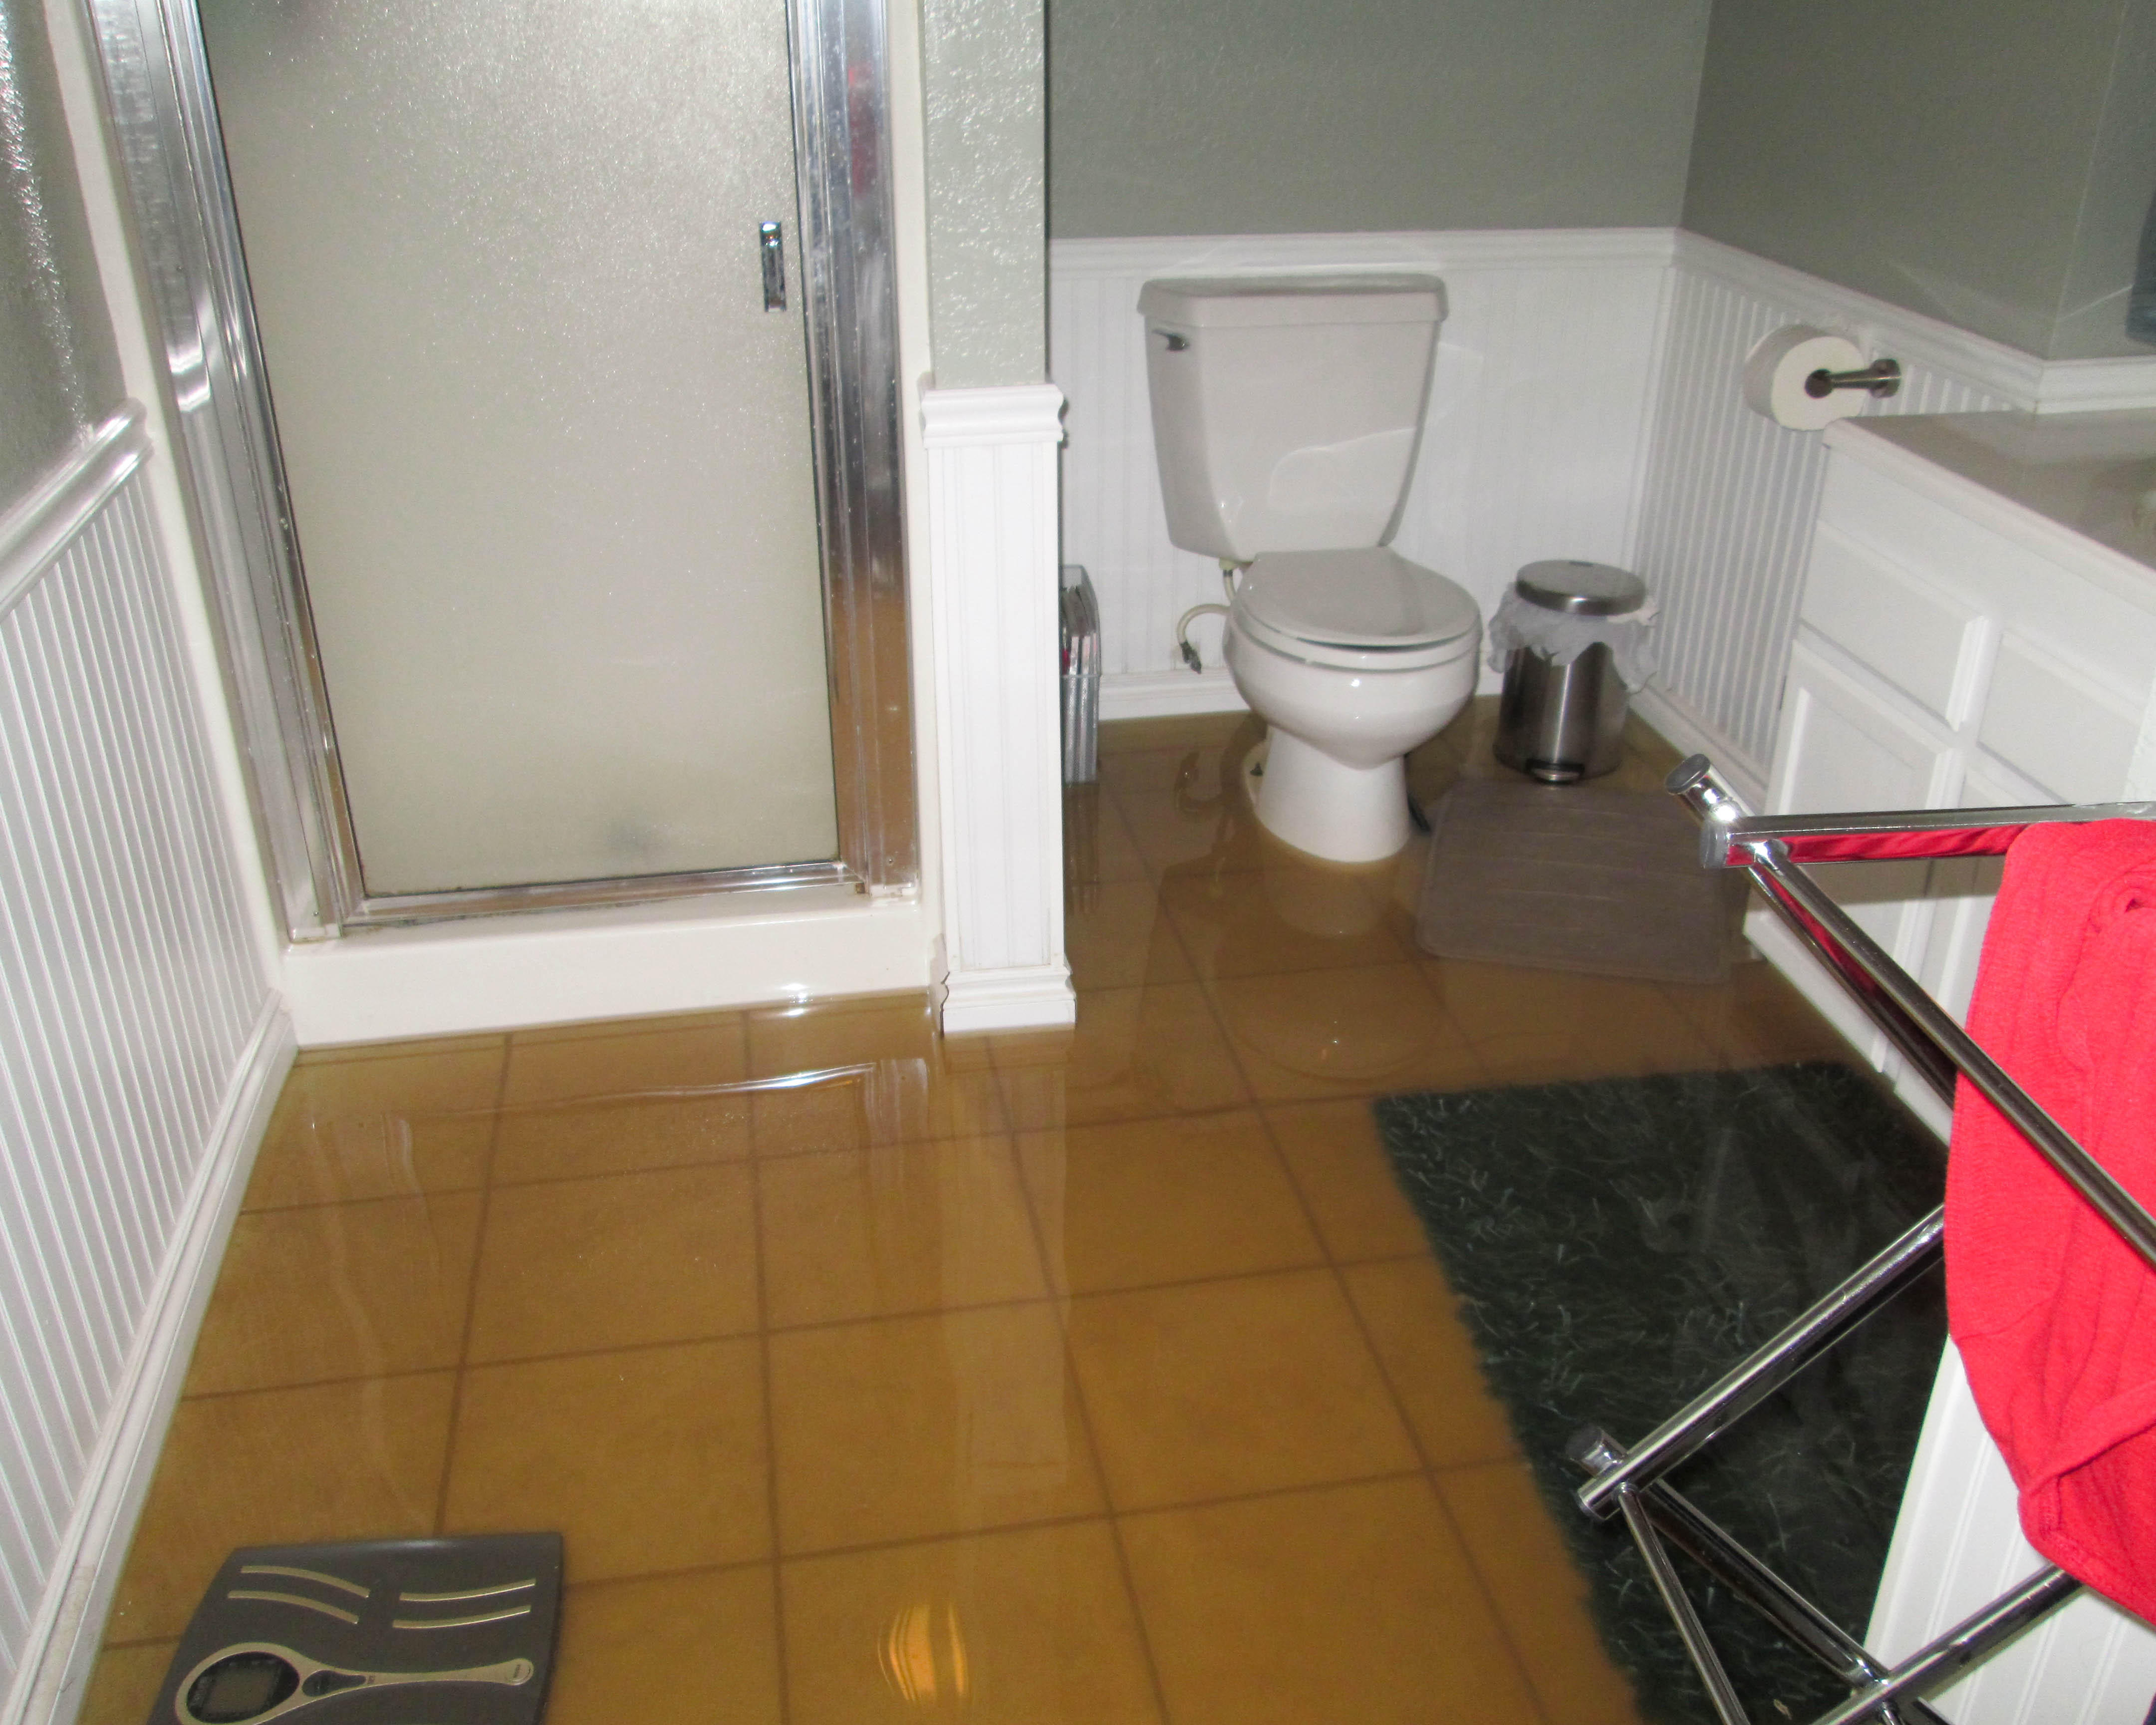 If you find standing water in your home, SERVPRO is here to help!